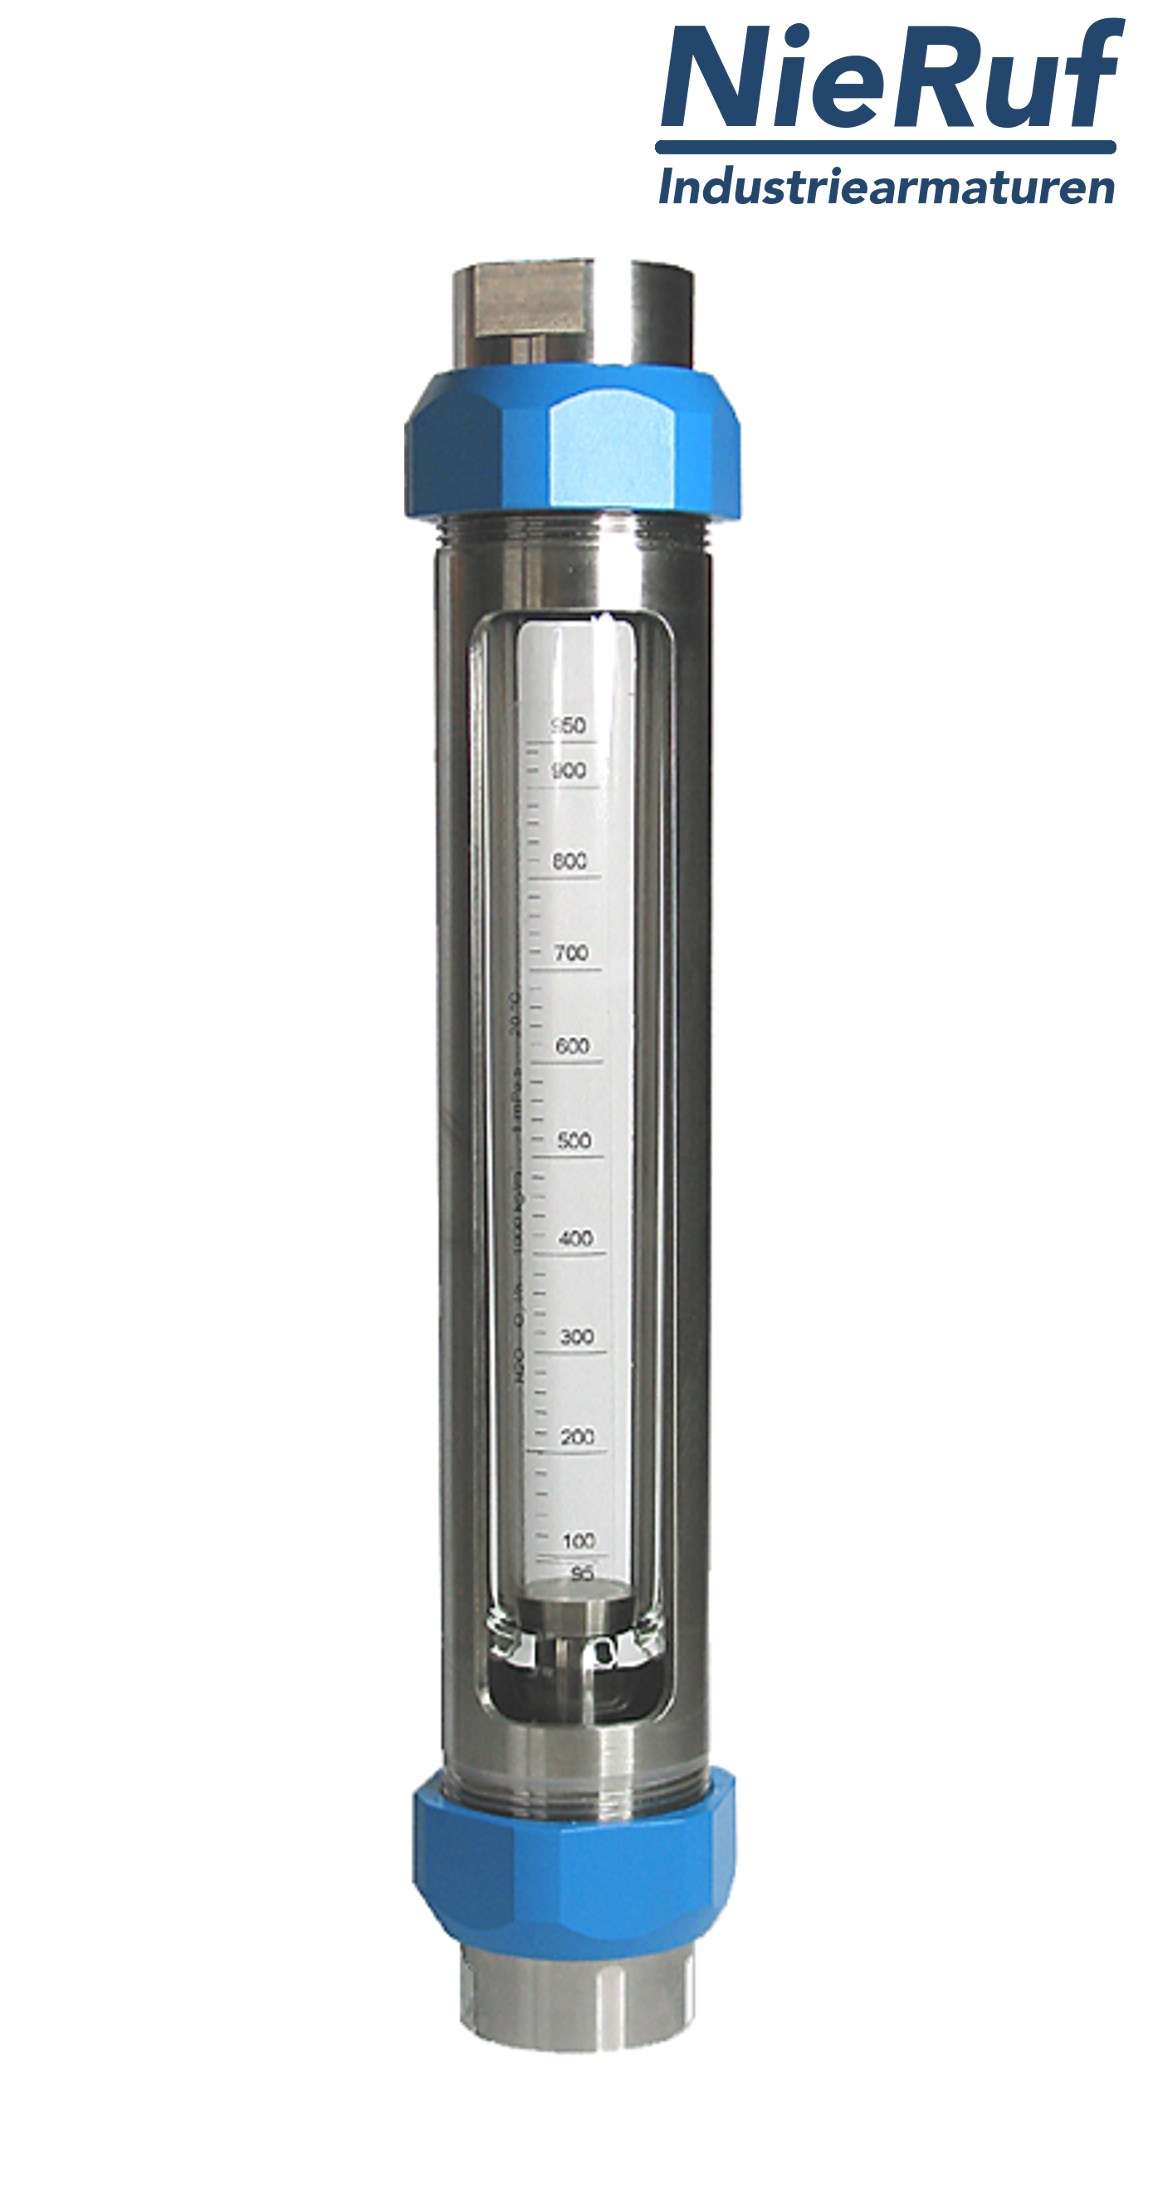 Variable area flowmeter stainless steel + borosilicate 2" inch 800.0 - 8000 l/h water FKM